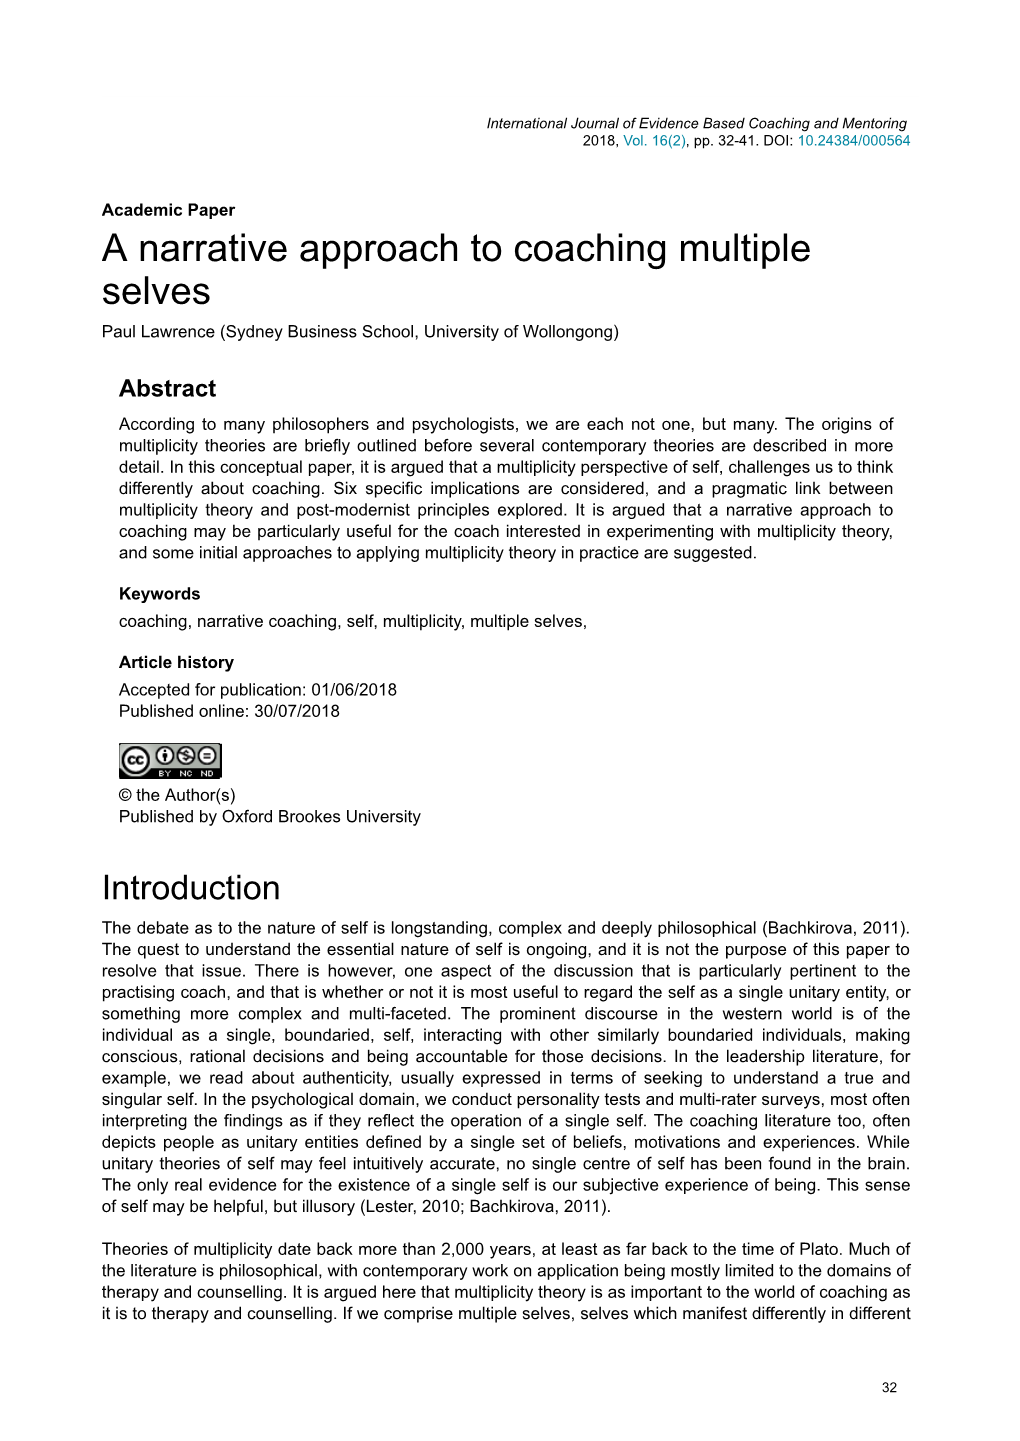 A Narrative Approach to Coaching Multiple Selves Paul Lawrence (Sydney Business School, University of Wollongong)